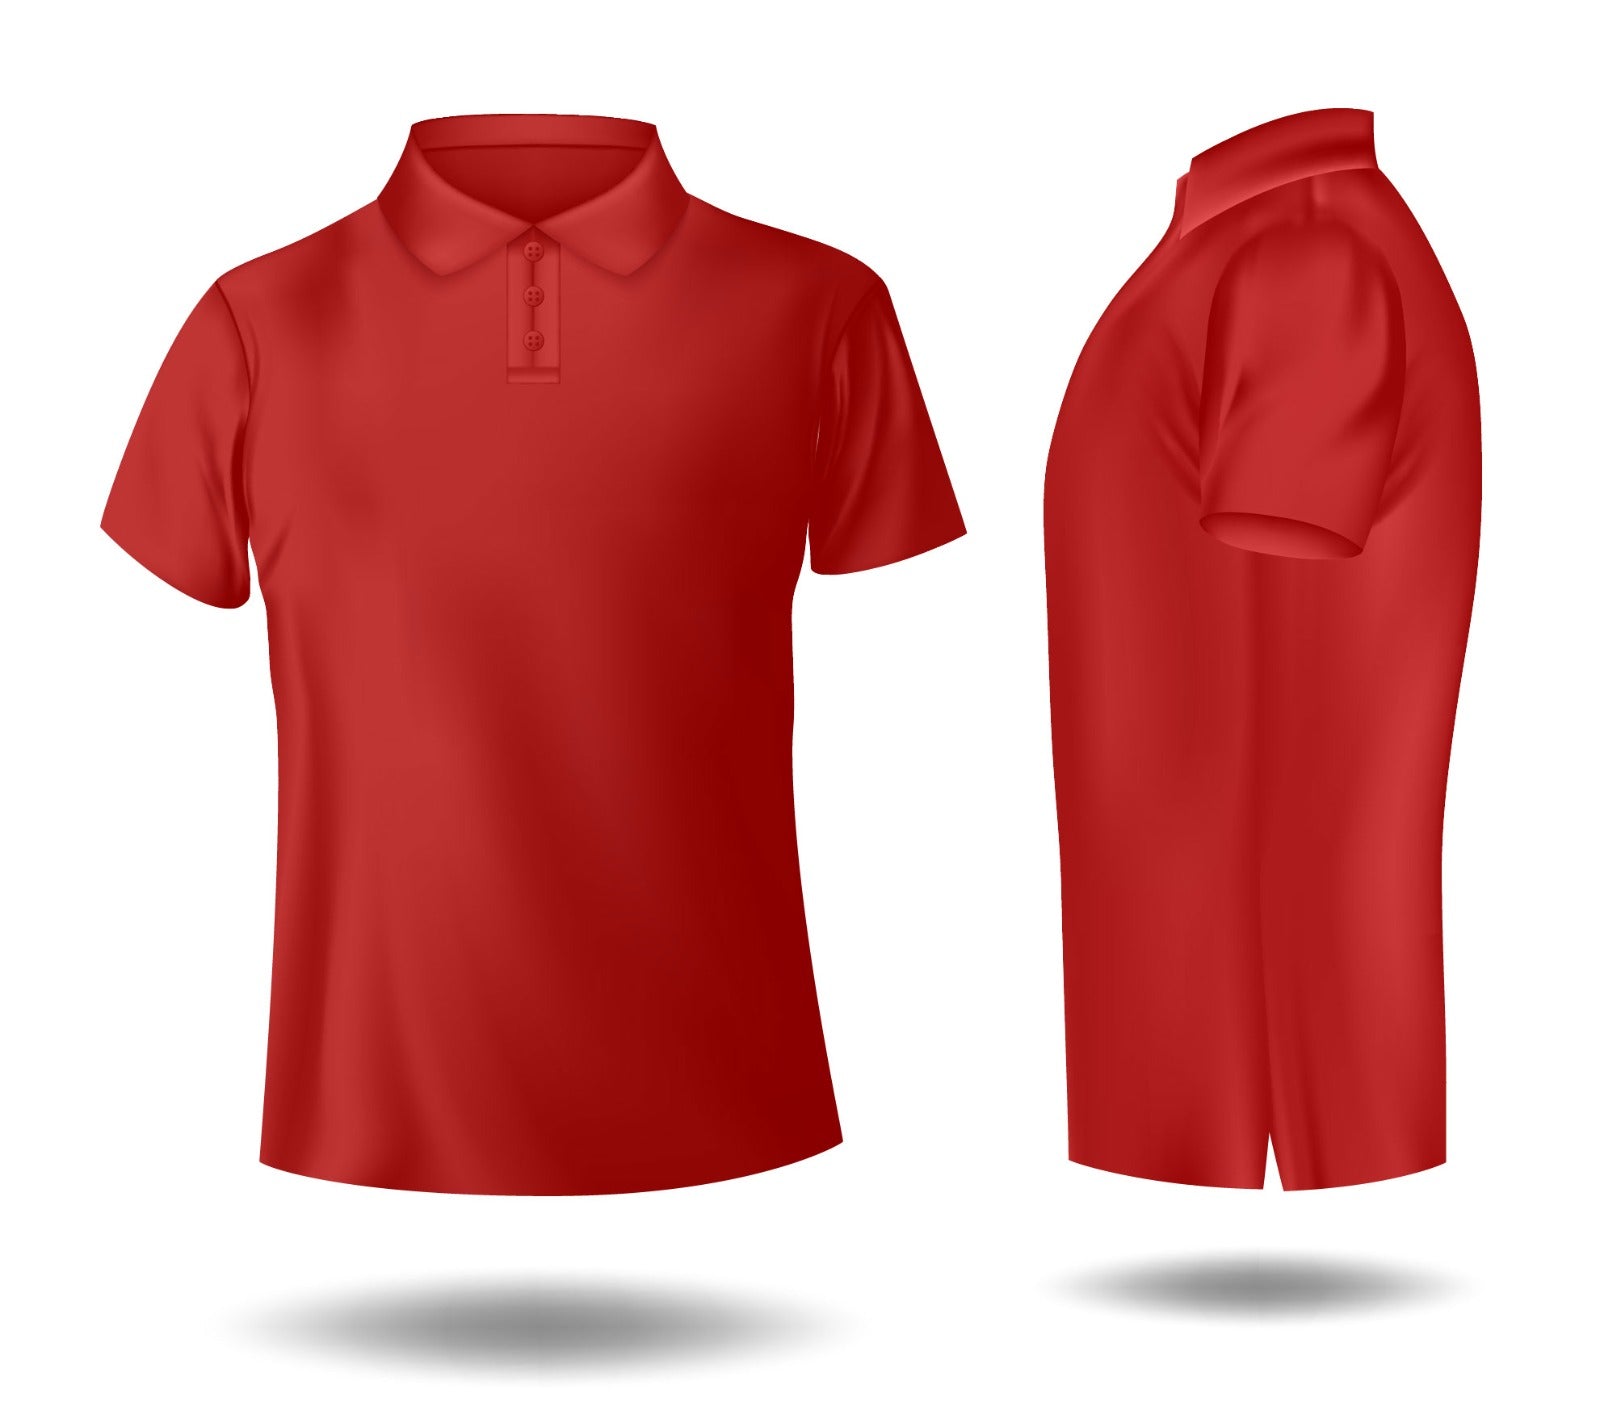 Red polo shirt for men and women